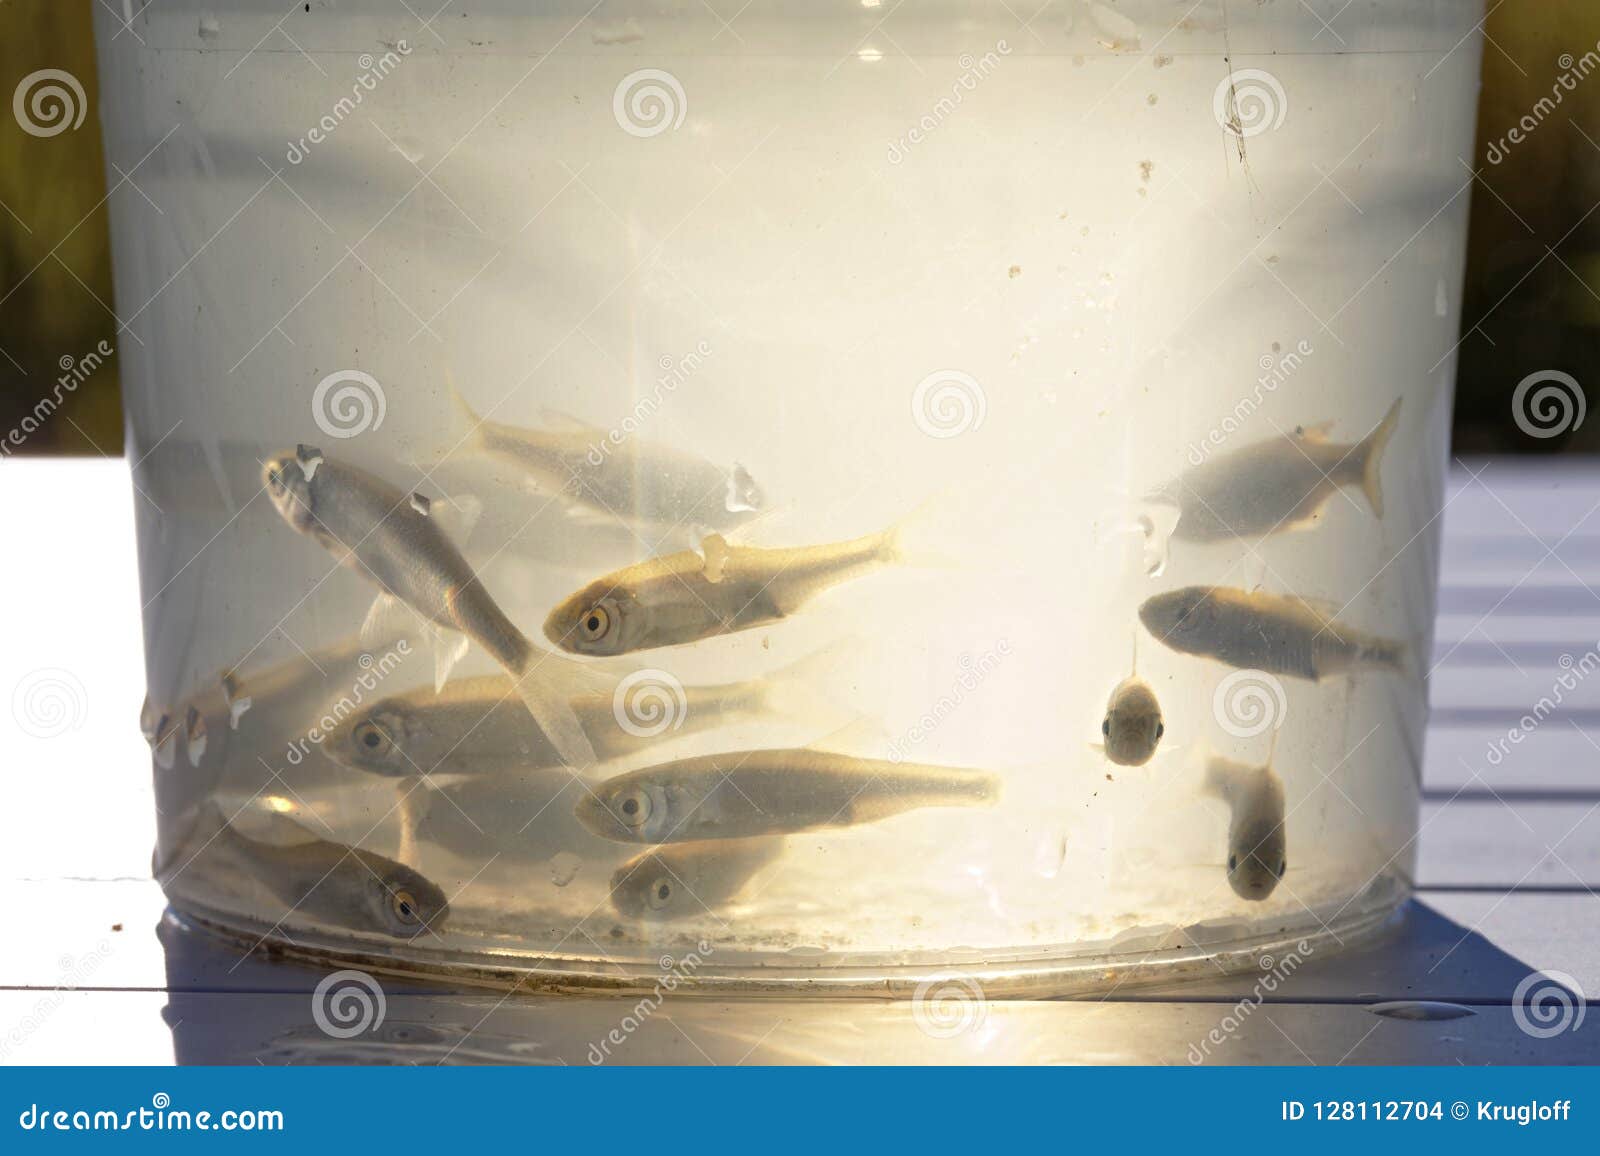 Small Live Minnows As Bait for Predatory Fish Stock Photo - Image